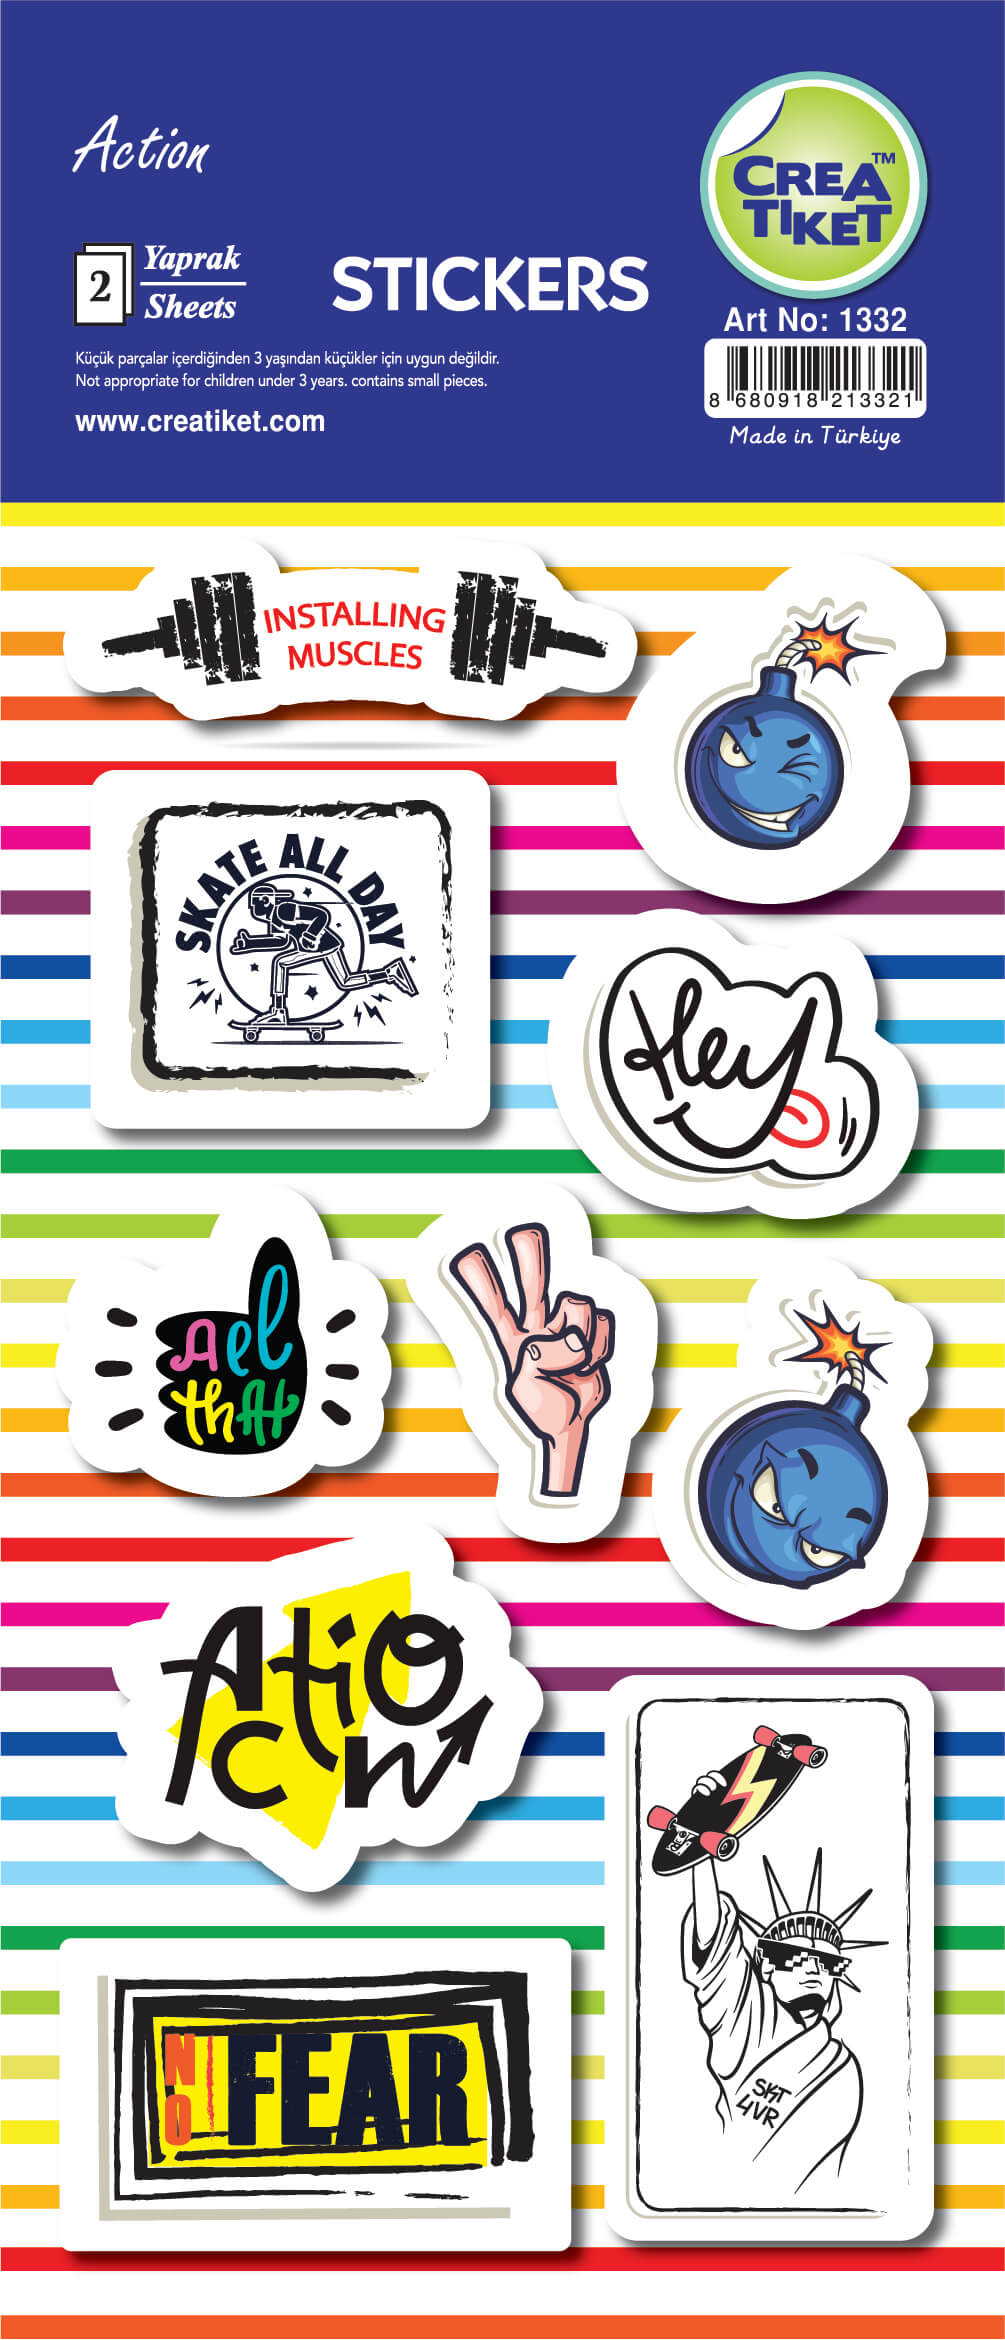 Art No : 1332 | Special Effect Stickers - Action